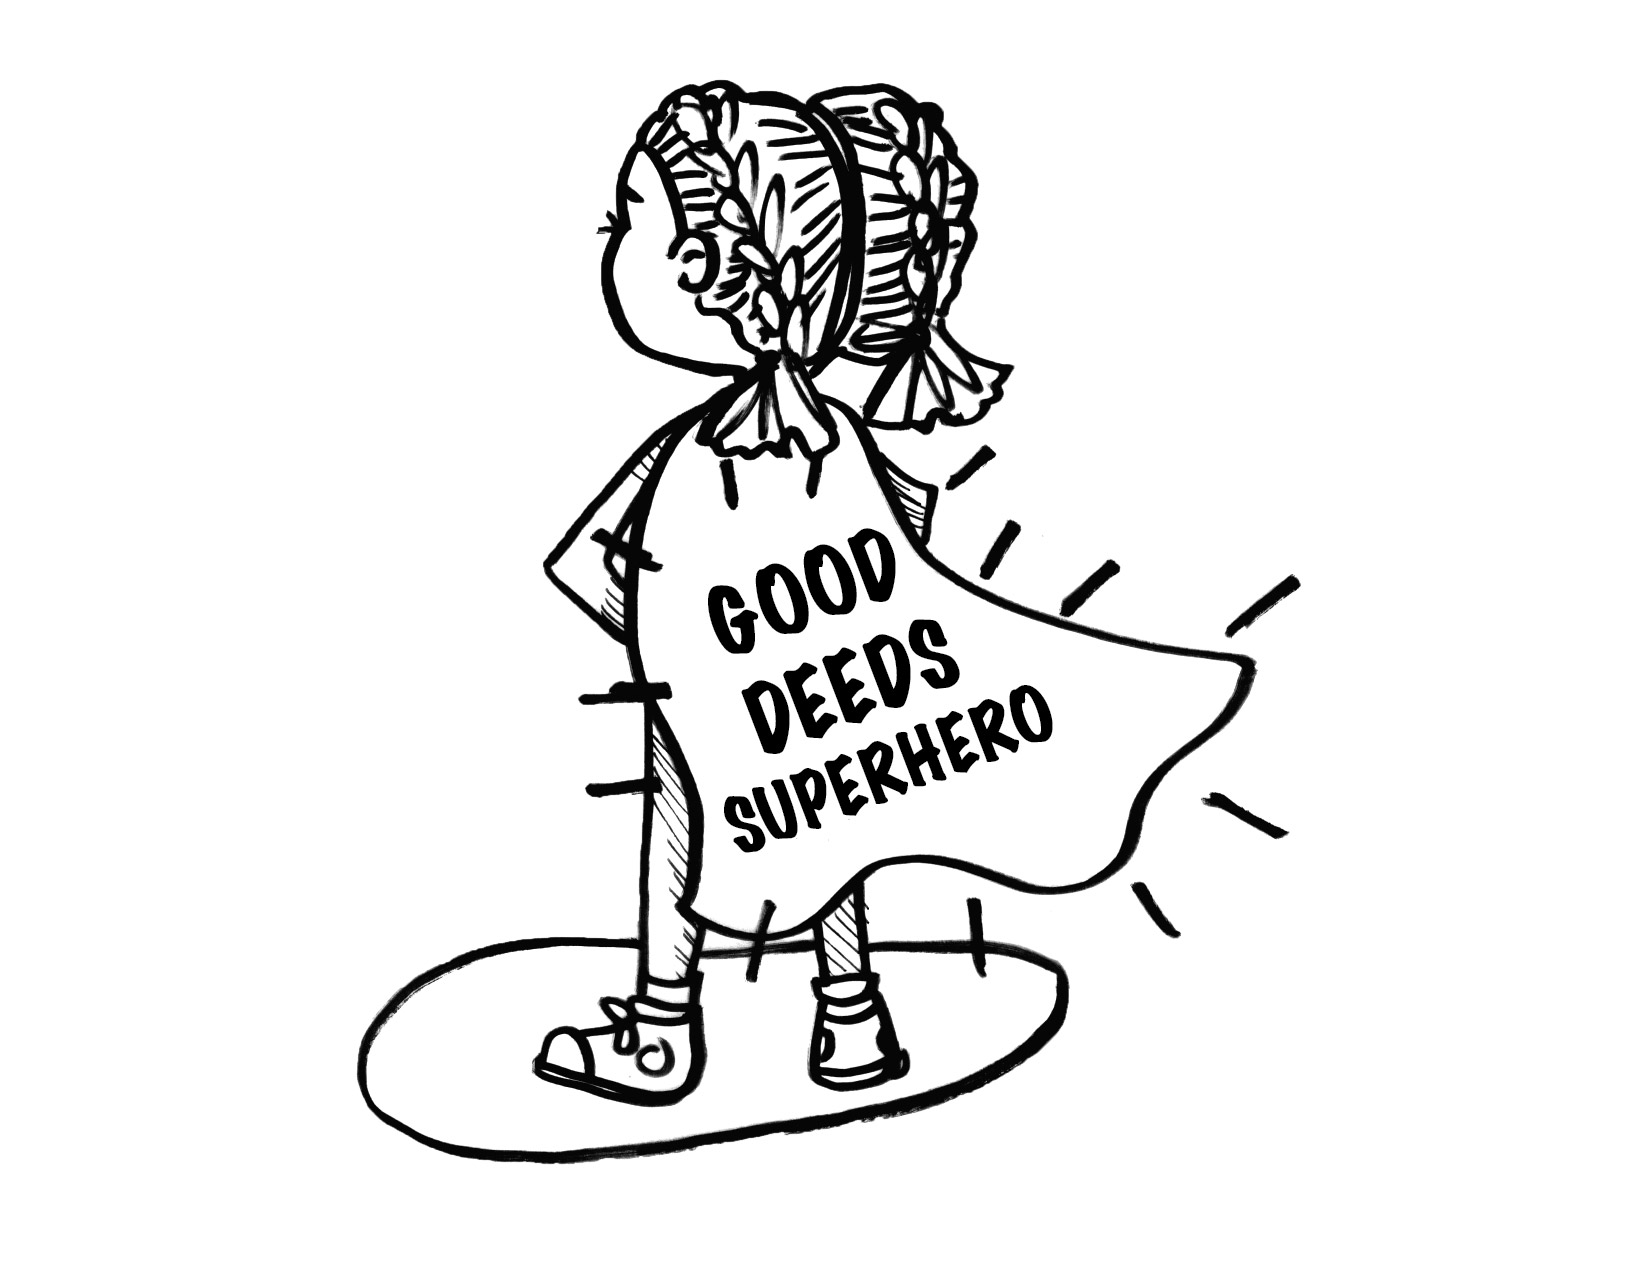 Coloring page of a girl wearing a cape that says "Good Deeds"